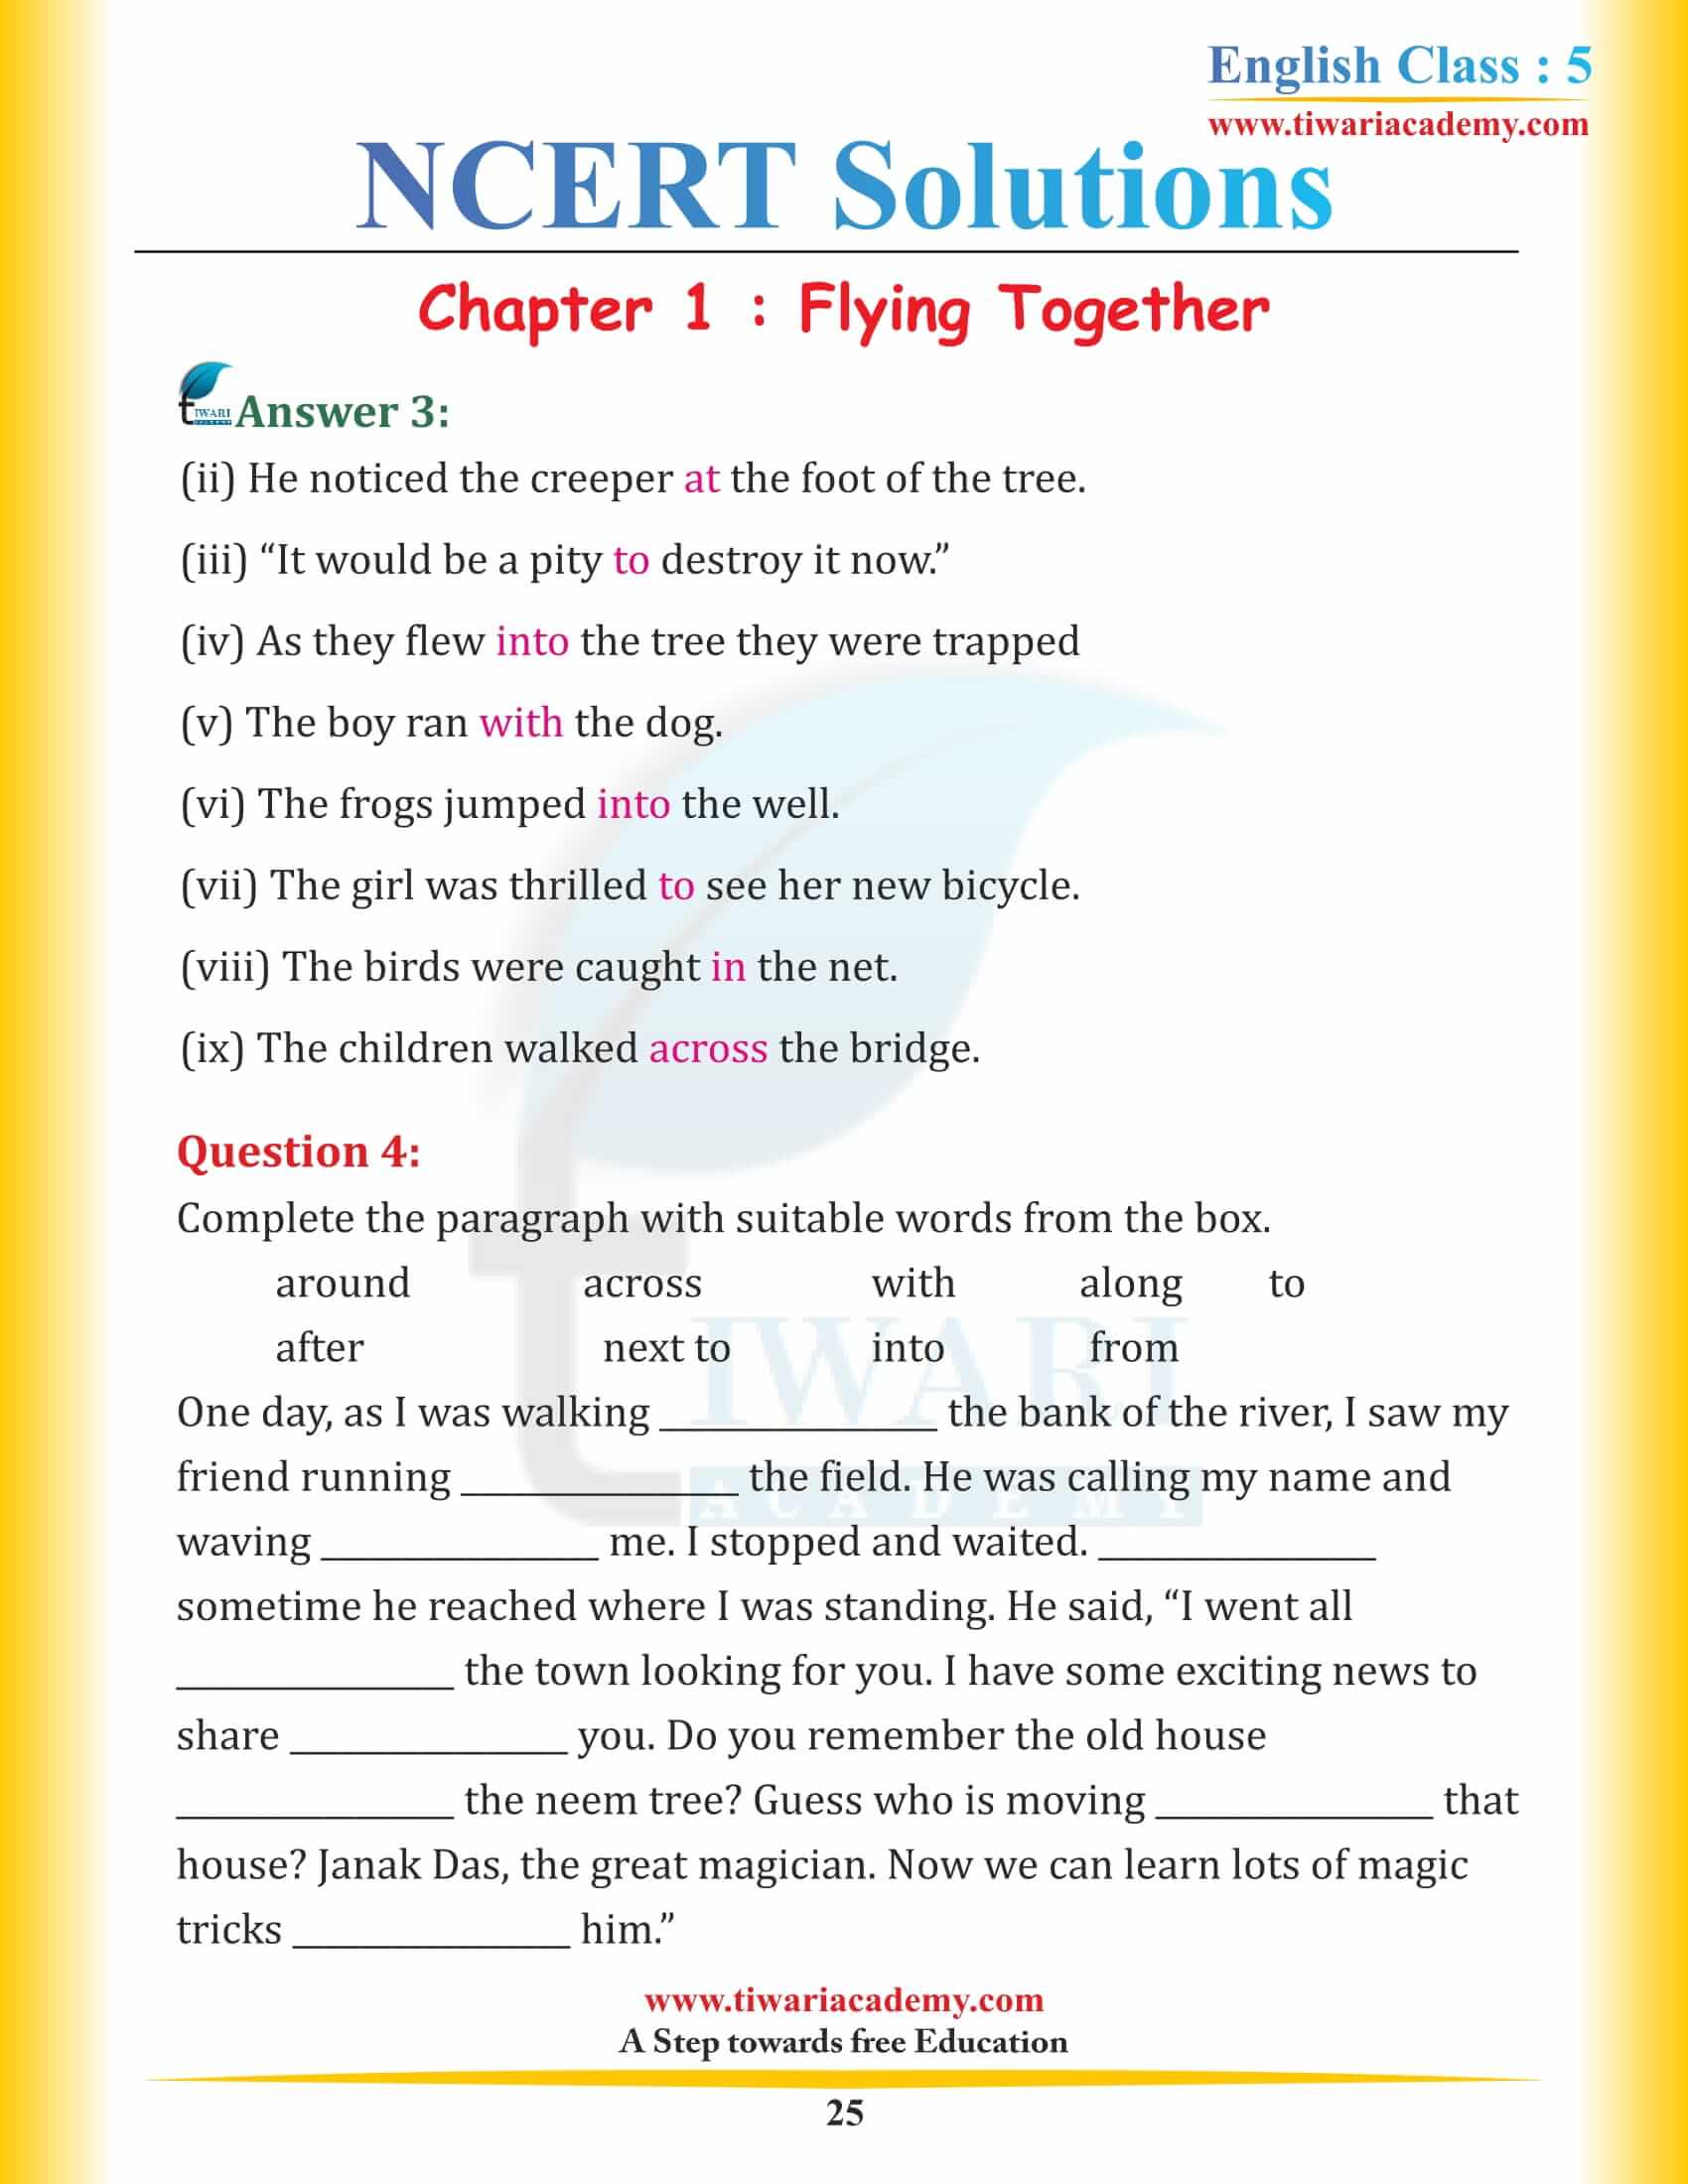 NCERT Solutions Class 5 English Chapter 1 Flying Together in Hindi